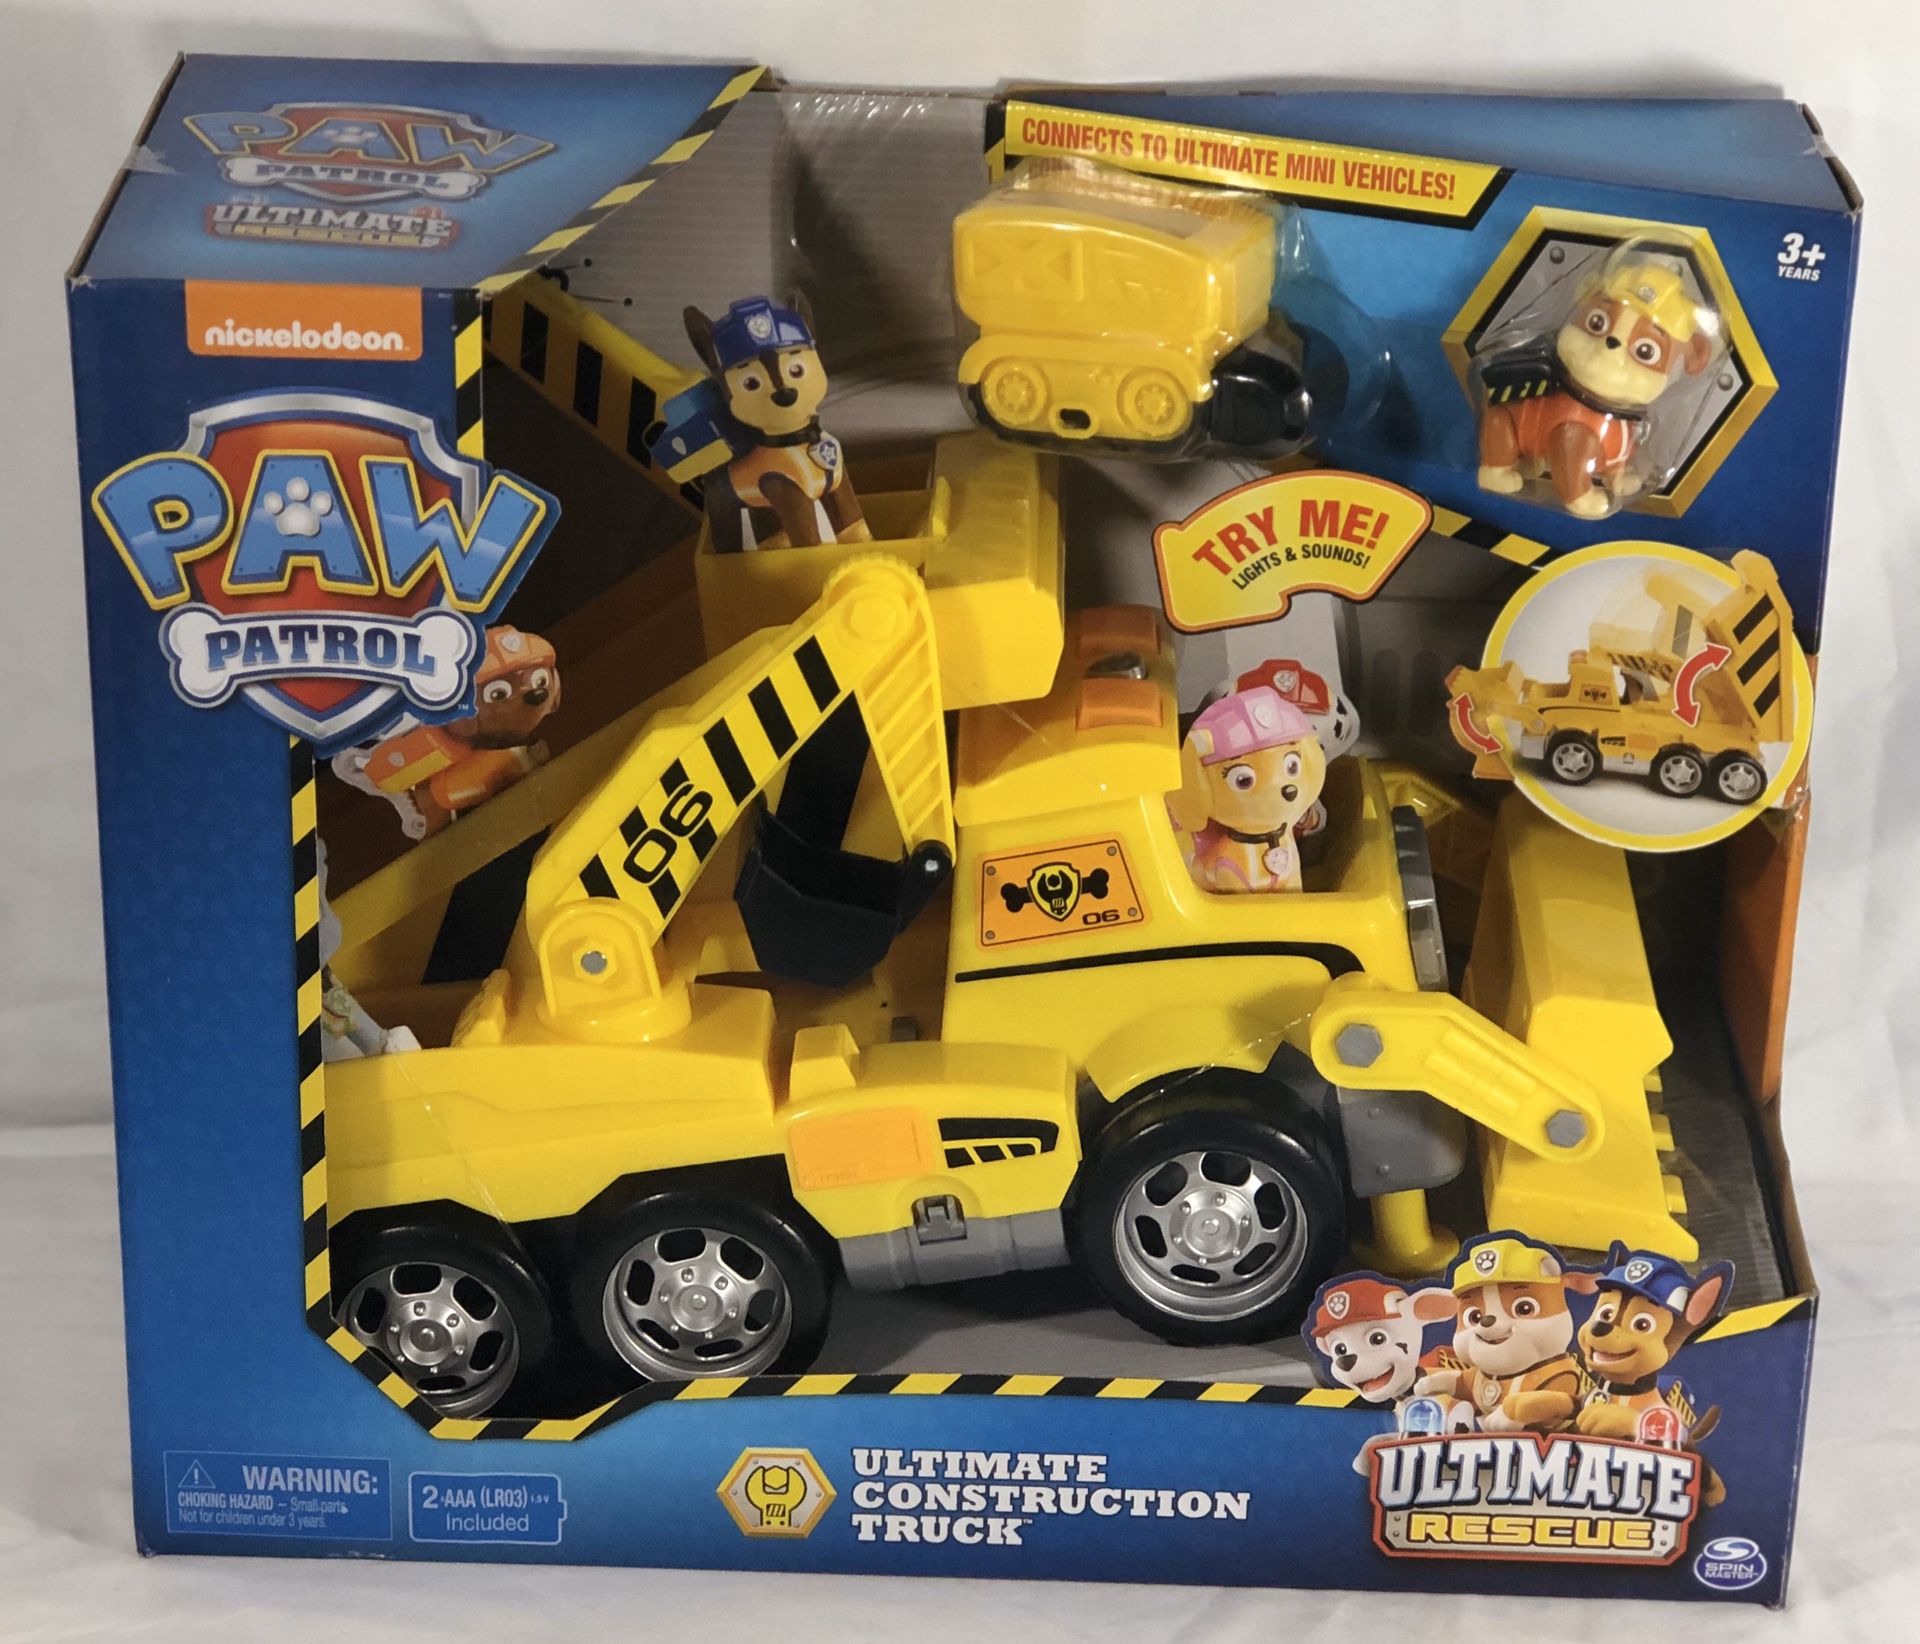 Rebel PAW Patrol Rescue ultimate Construction Truck